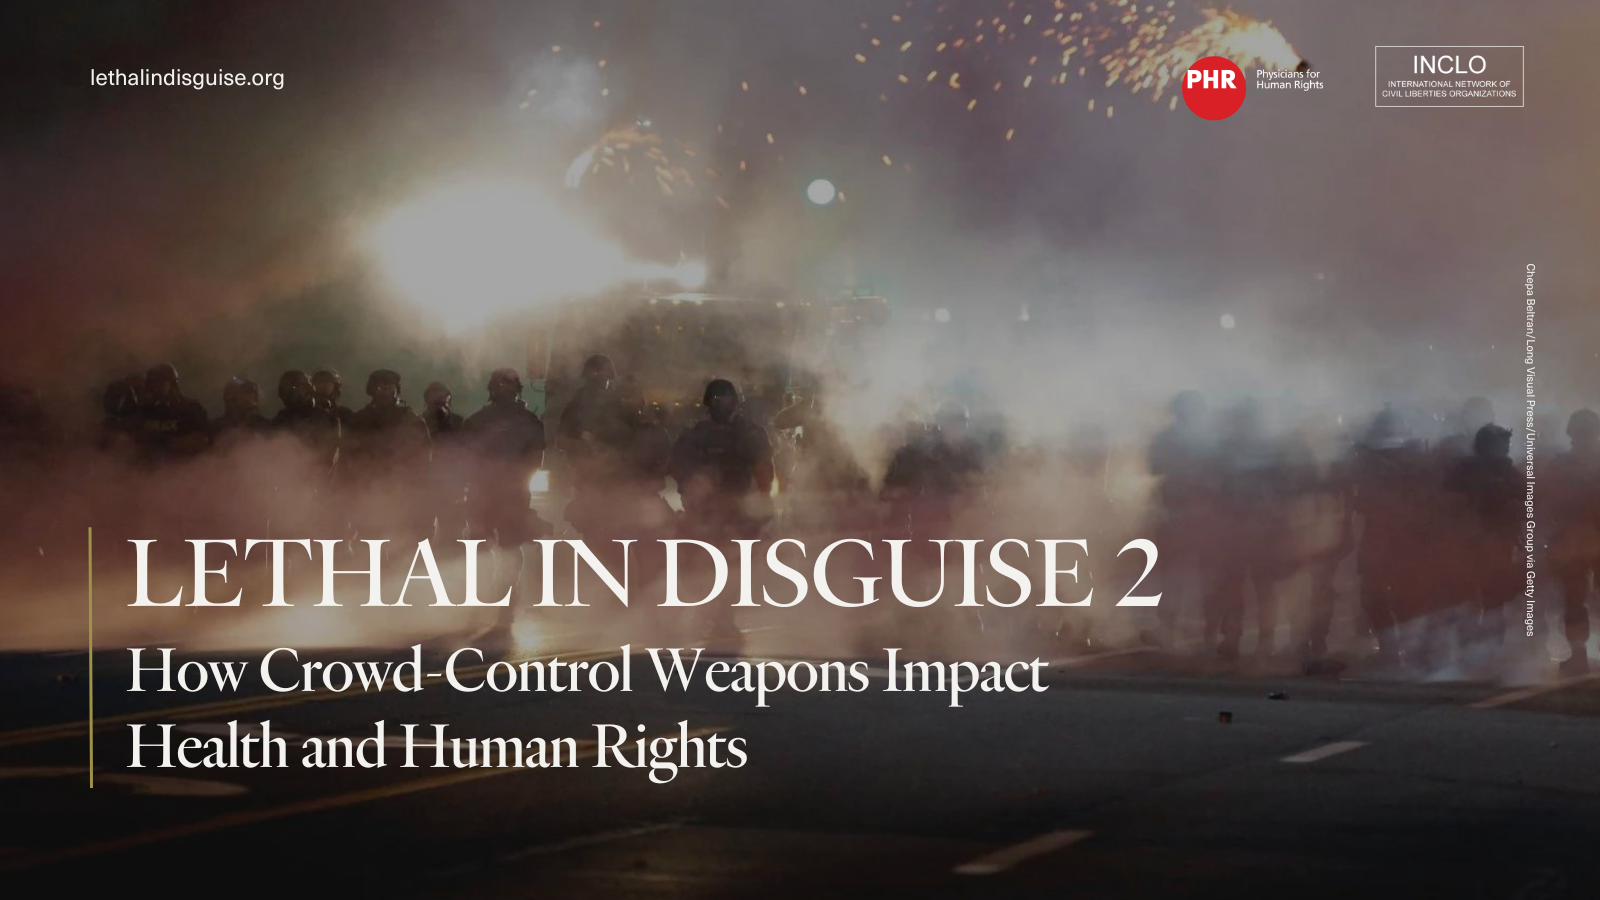 Lethal in Disguise 2: How Crowd-Control Weapons Impact Health and Human Rights